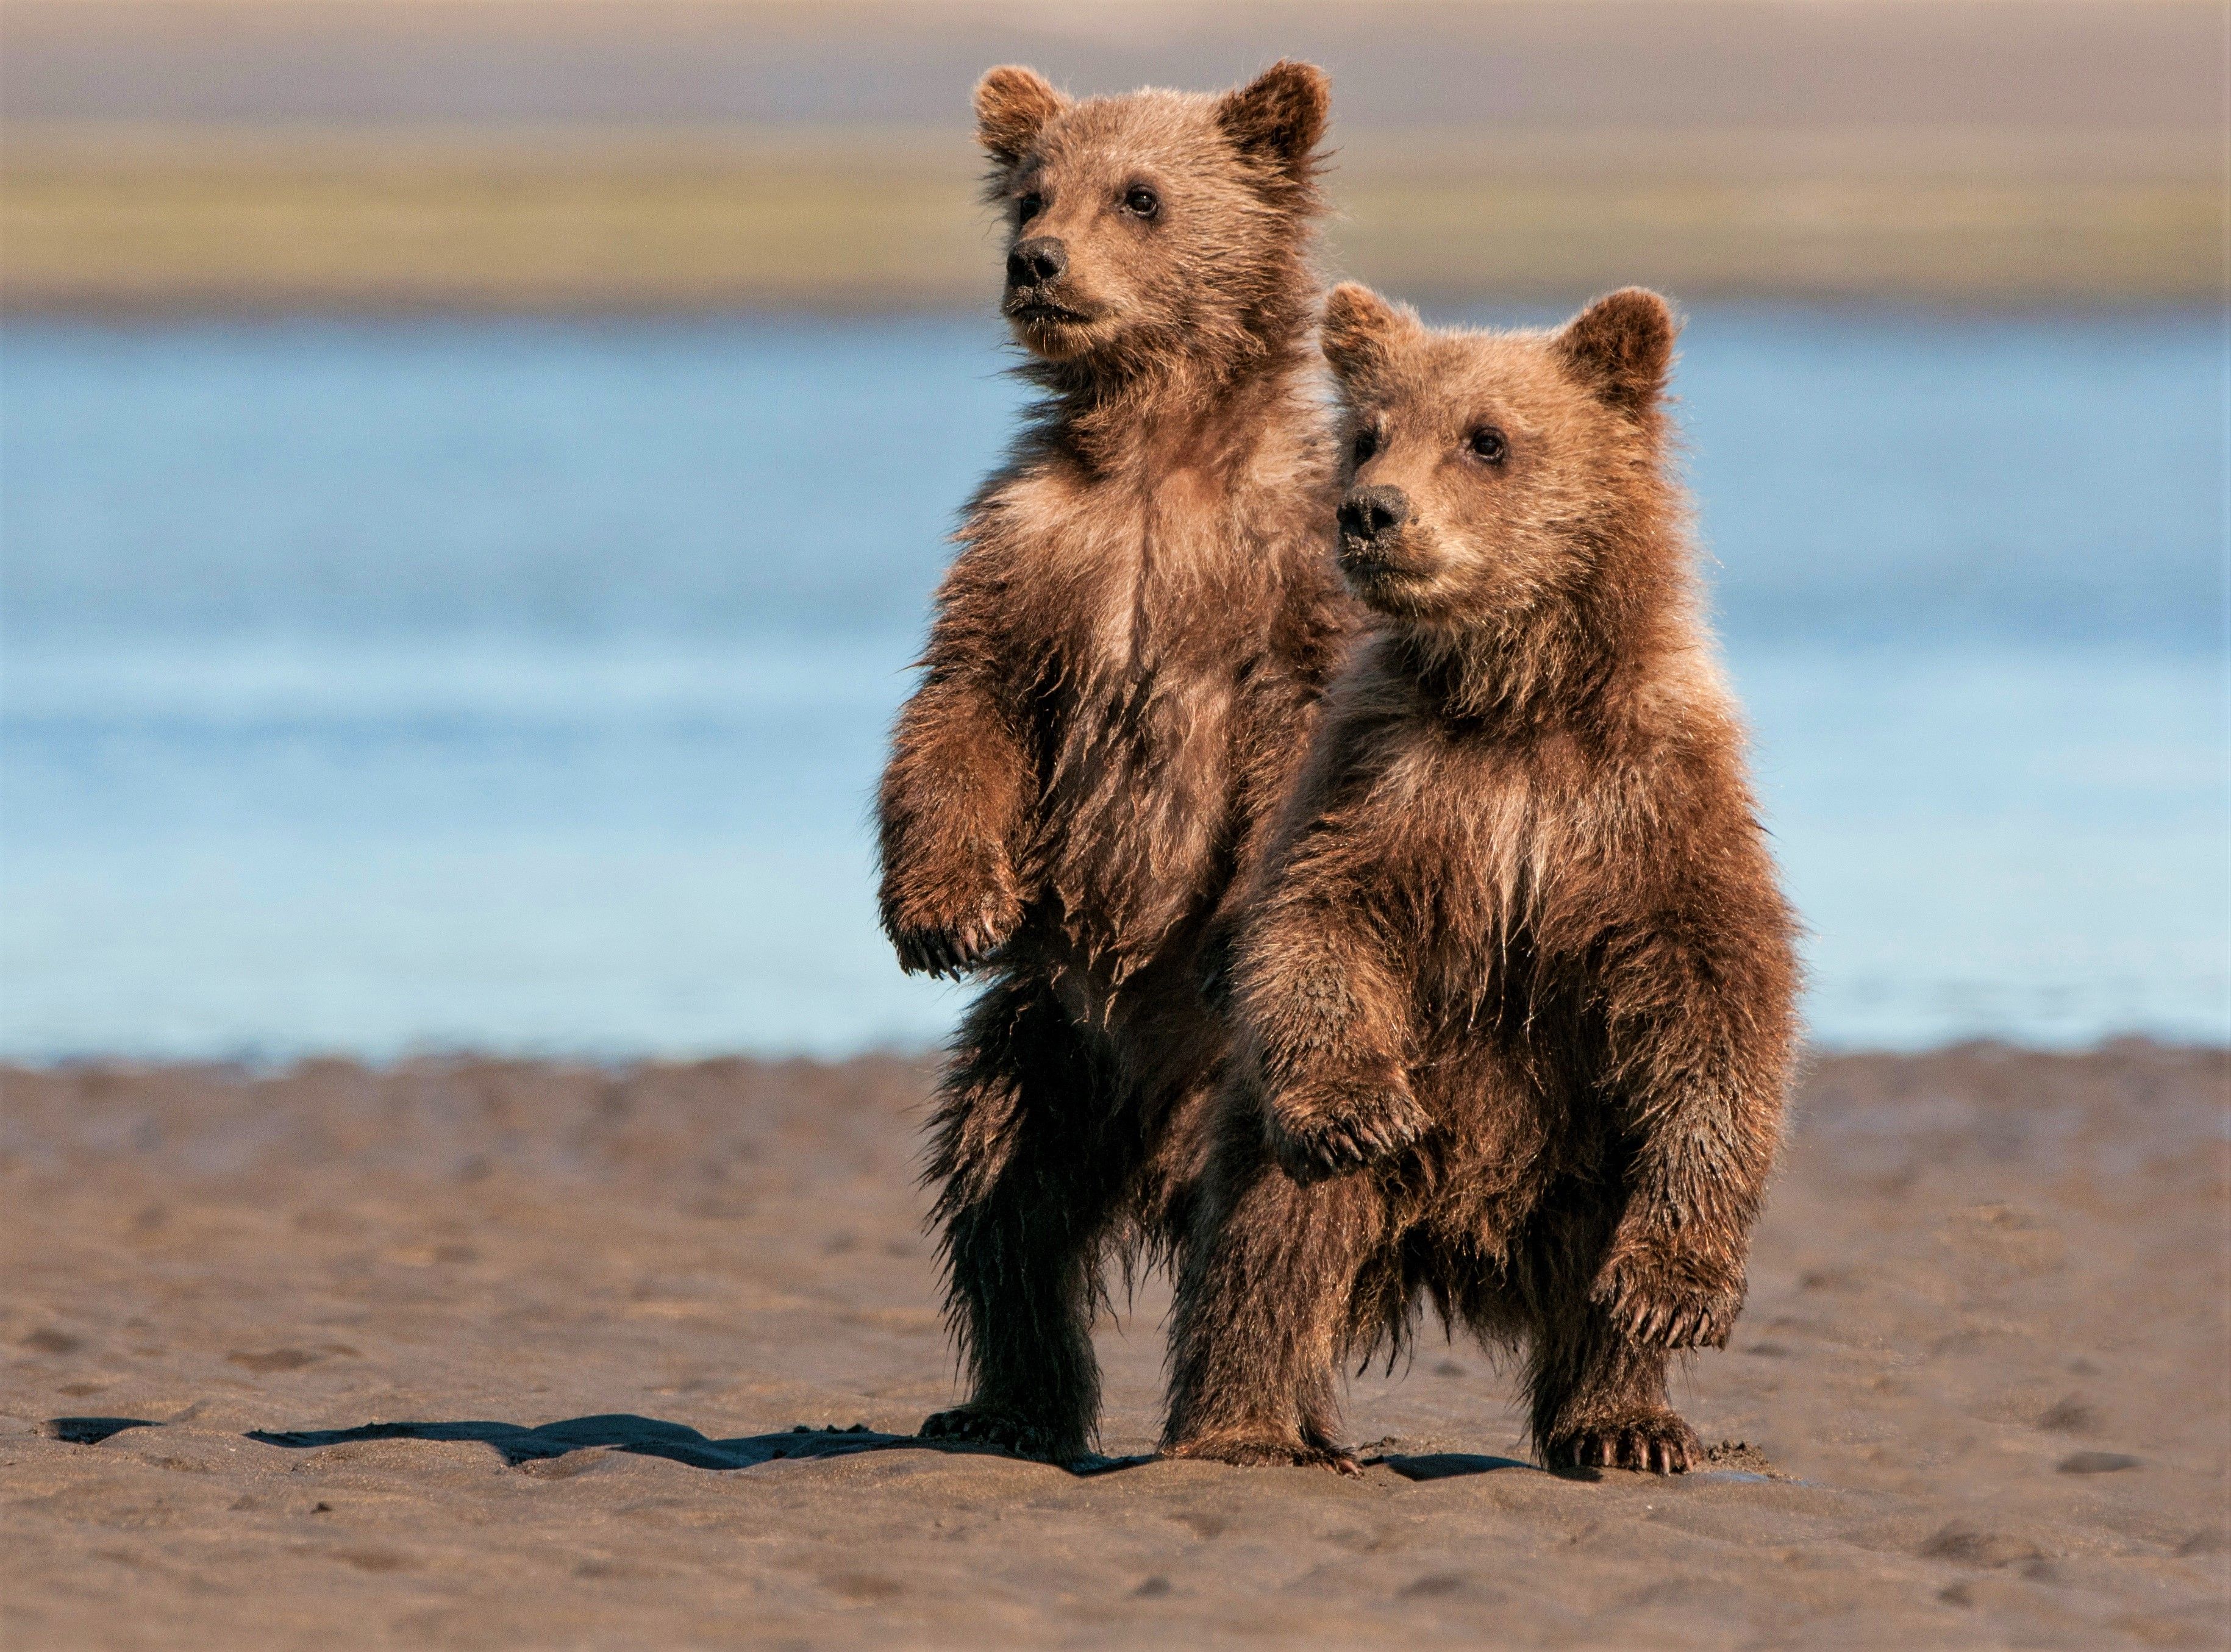 Two Bear Cubs on the Beach HD Wallpaper. Background Image